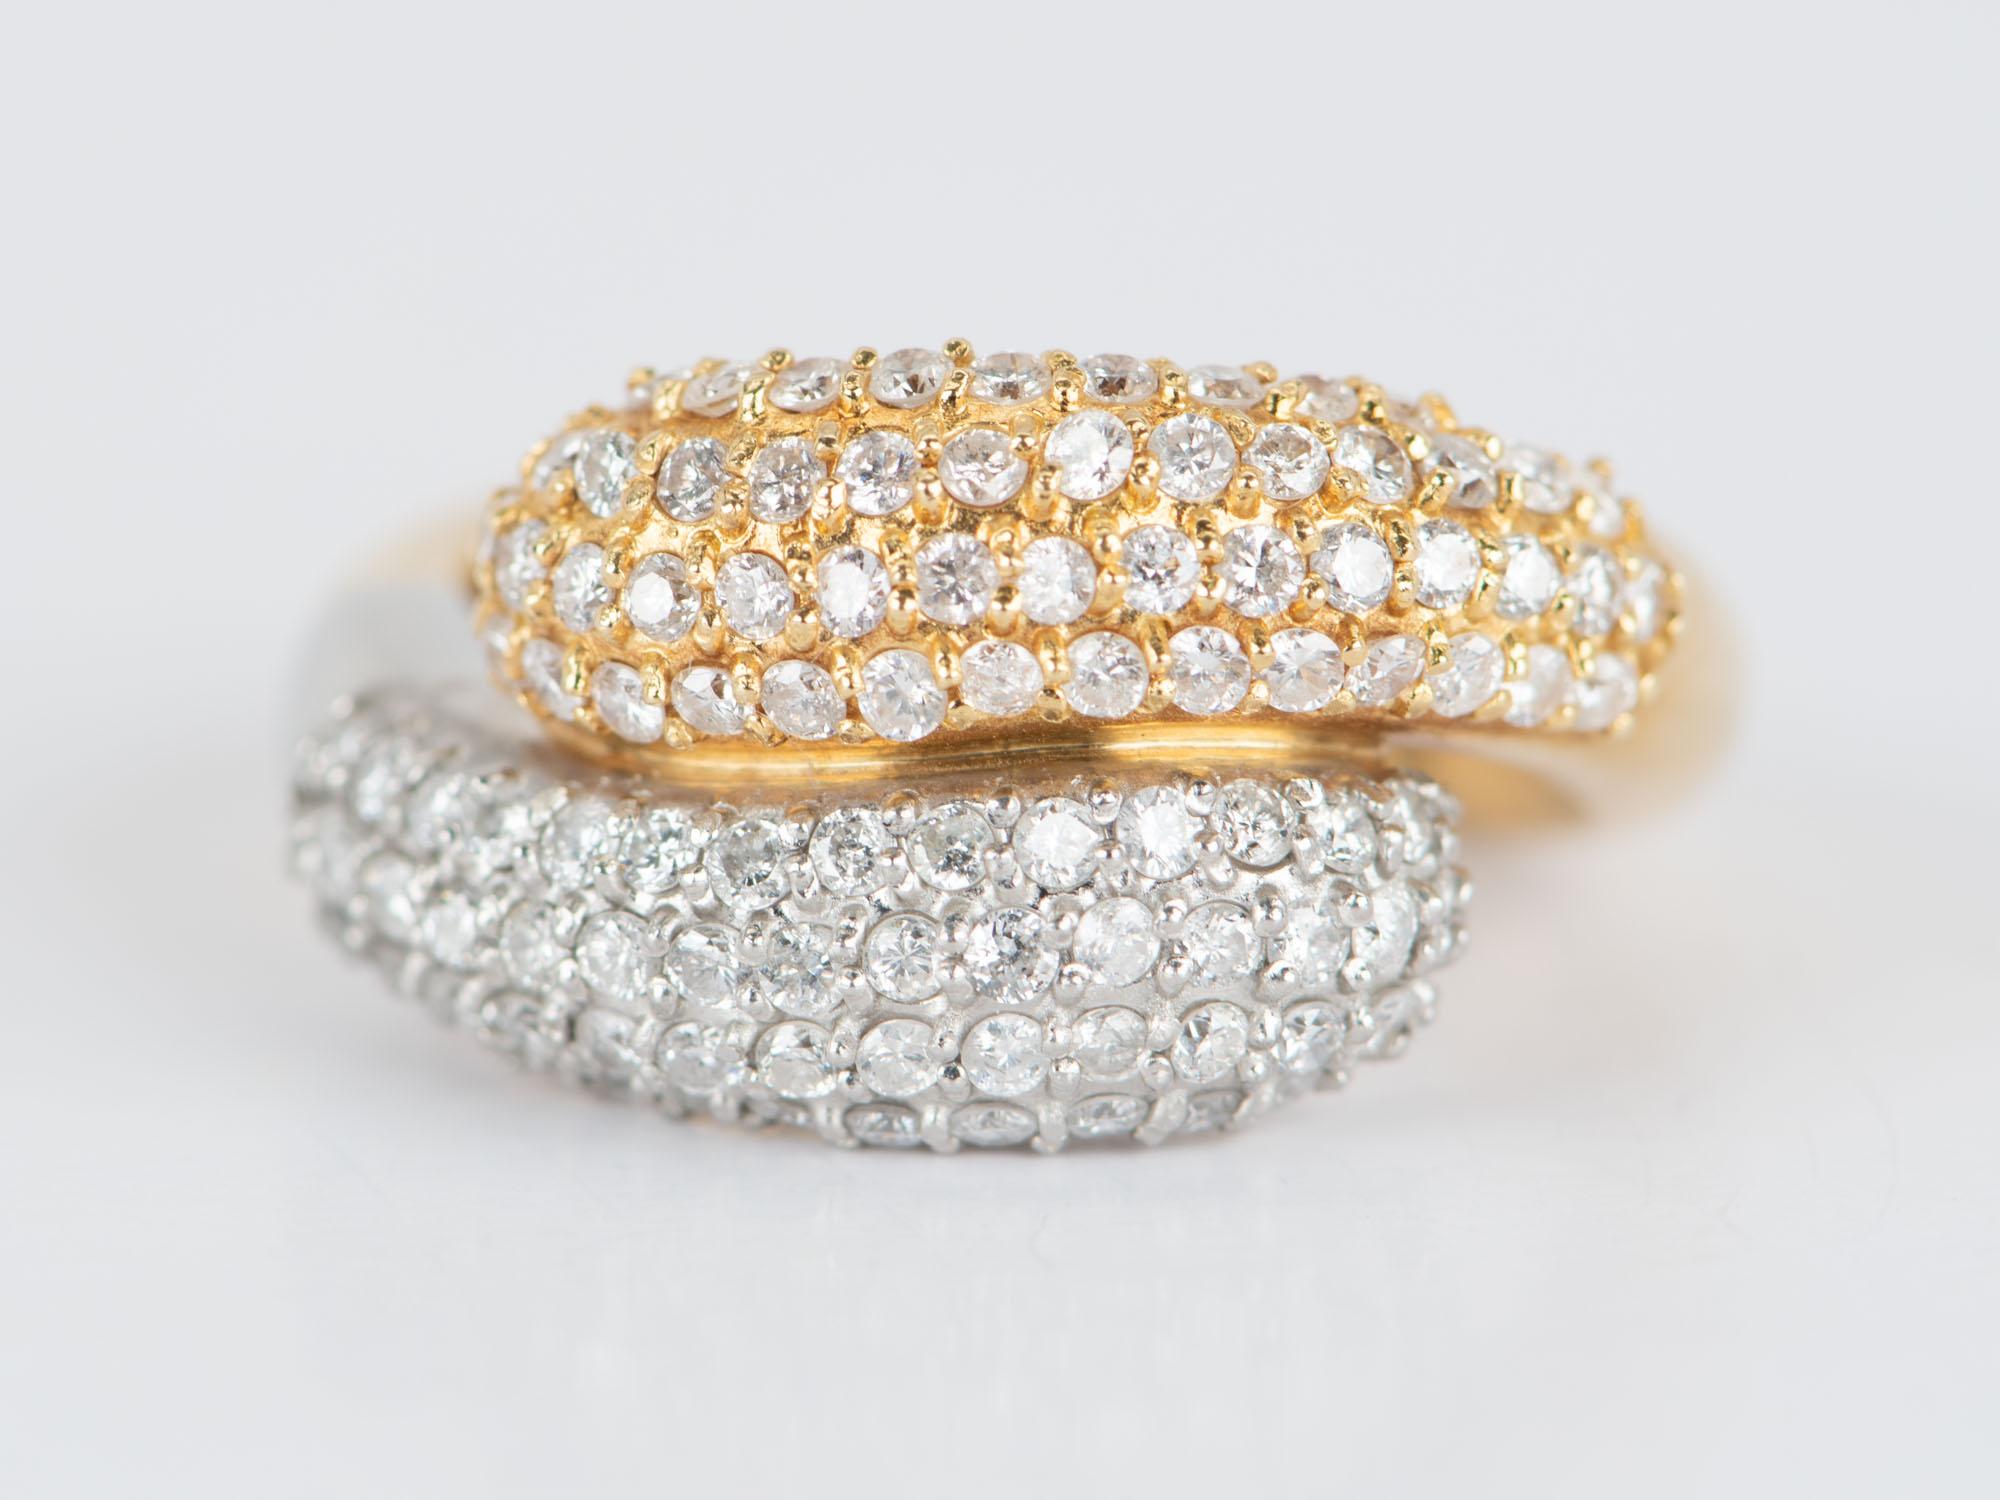 ♥ 18K Gold & PT950 Diamond Pave Double Head Snake Ring 8.7g 1ct Diamond R6651
♥The item measures 11.8mm in length, 21.3mm in width, and 4.5mm in thickness. Band width is 4.1mm. 

♥ Ring size: US Size 6.5 (Free resizing up or down 1 size)
♥ Material: